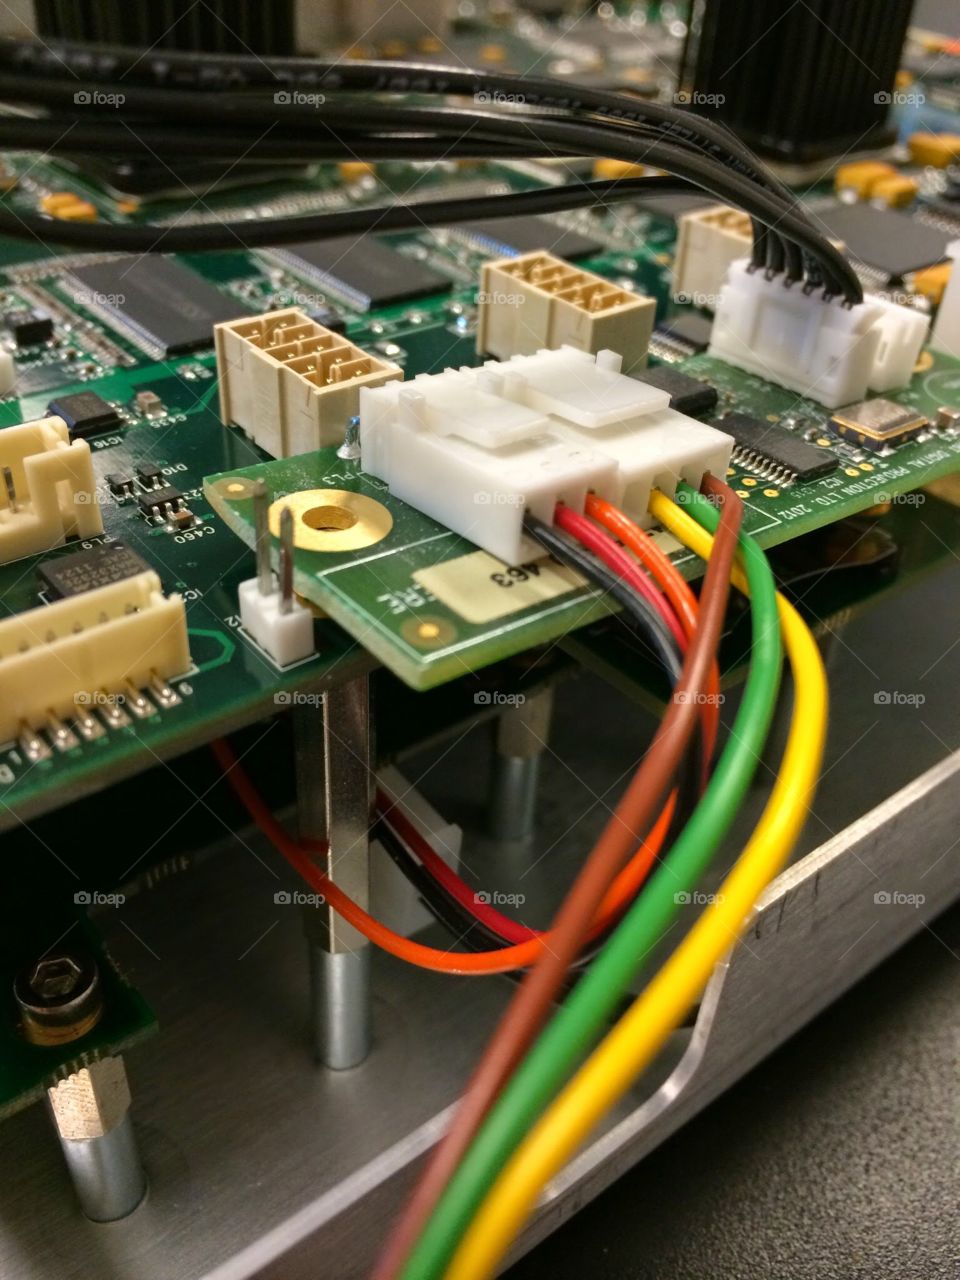 An electronics circuit board from an audio visual projector 